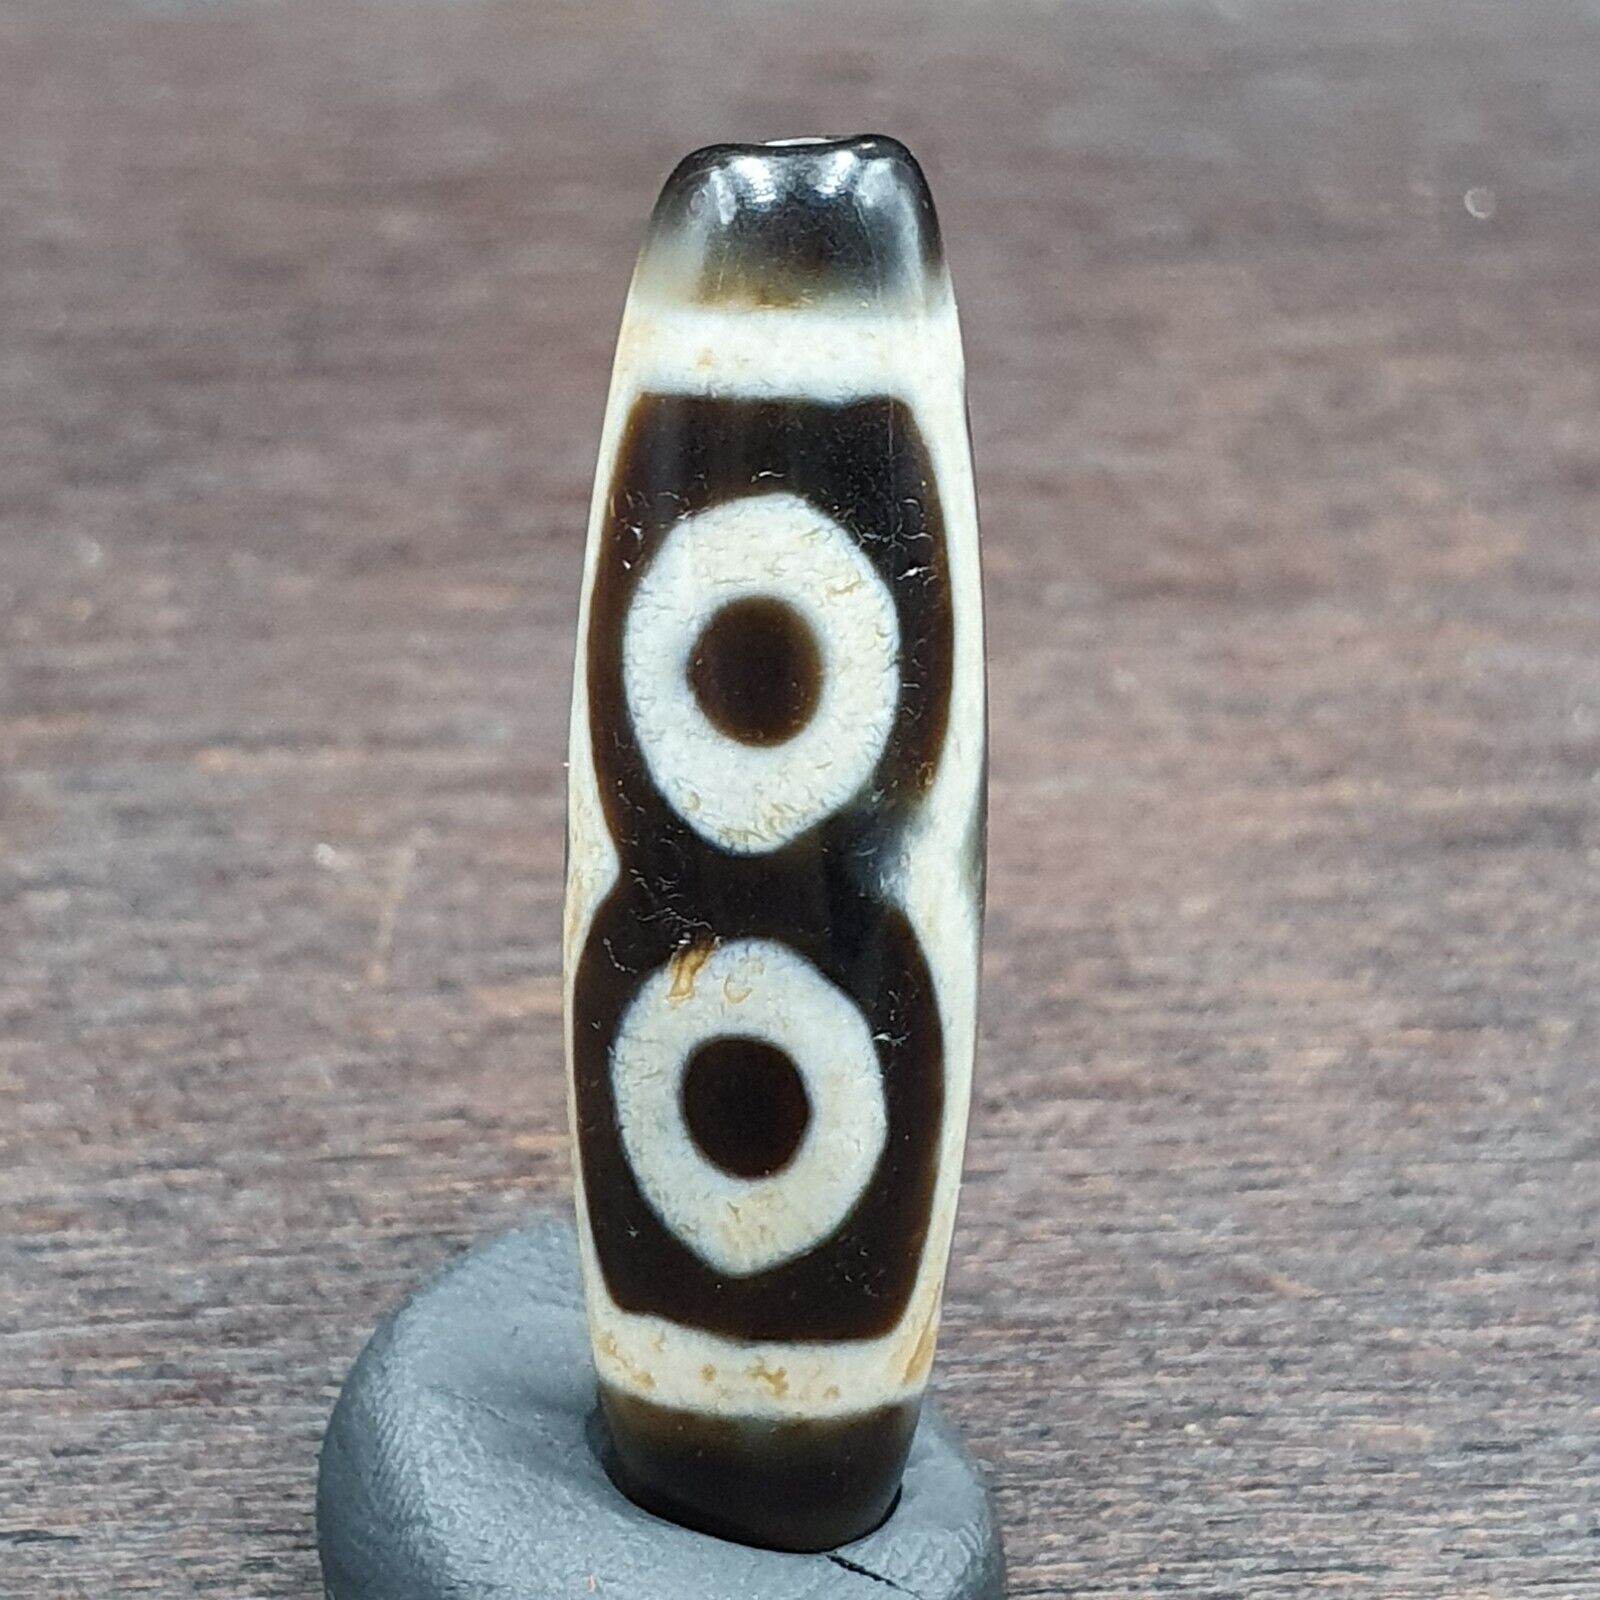 "Unique three-eyed agate bead from the Himalayas, featuring an intricate pattern and believed to possess spiritual powers, a rare find for collectors and enthusiasts."